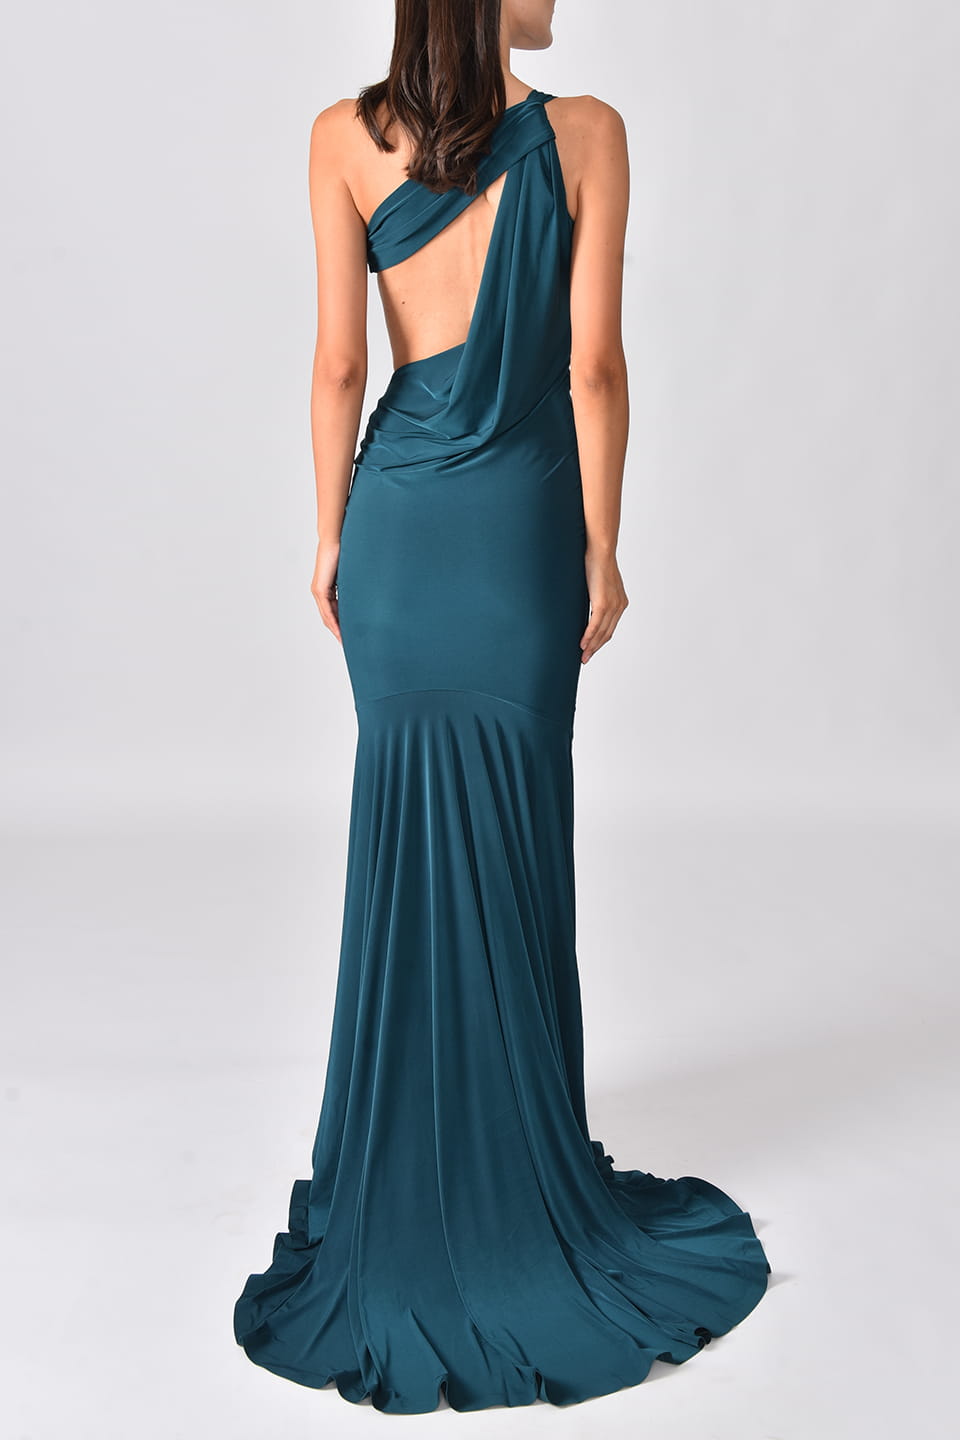 Thumbnail for Product gallery 2, Model wears Special occasion Maxi dress in Petrol Blue color from Hamel fashion stylist, posing from behind